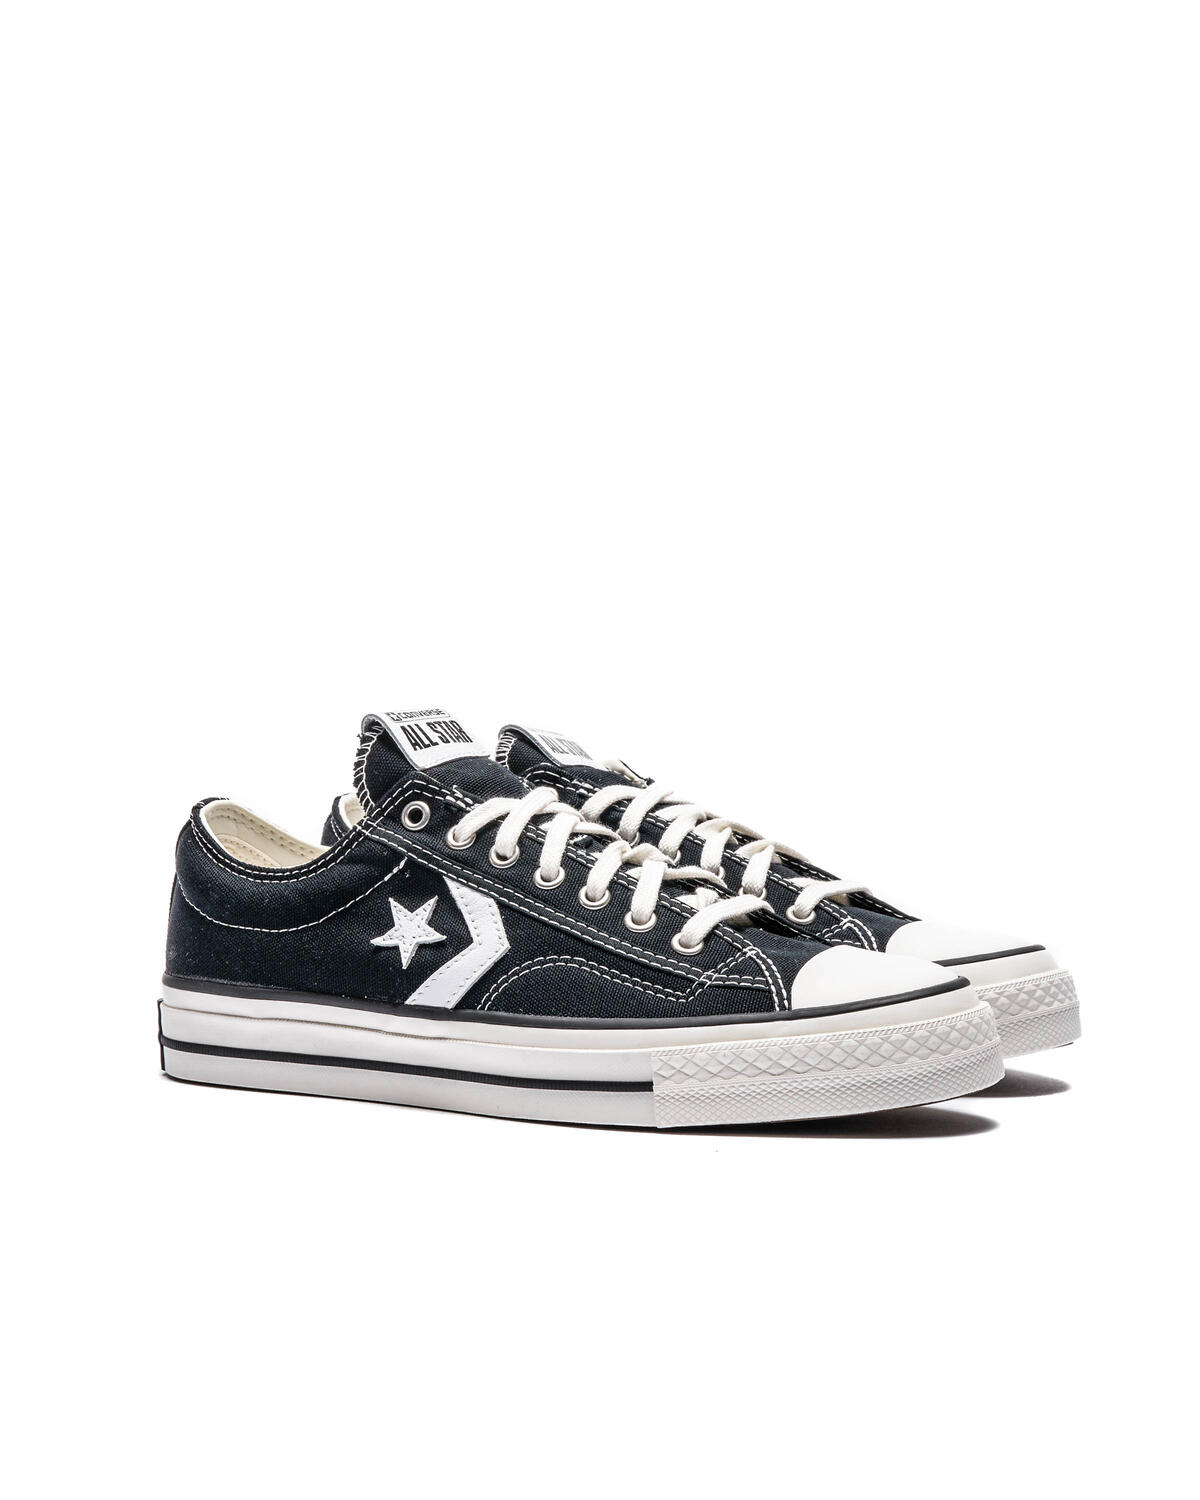 Microbio Marchitar esquina Converse STAR PLAYER 76 OX | A01607C | AFEW STORE